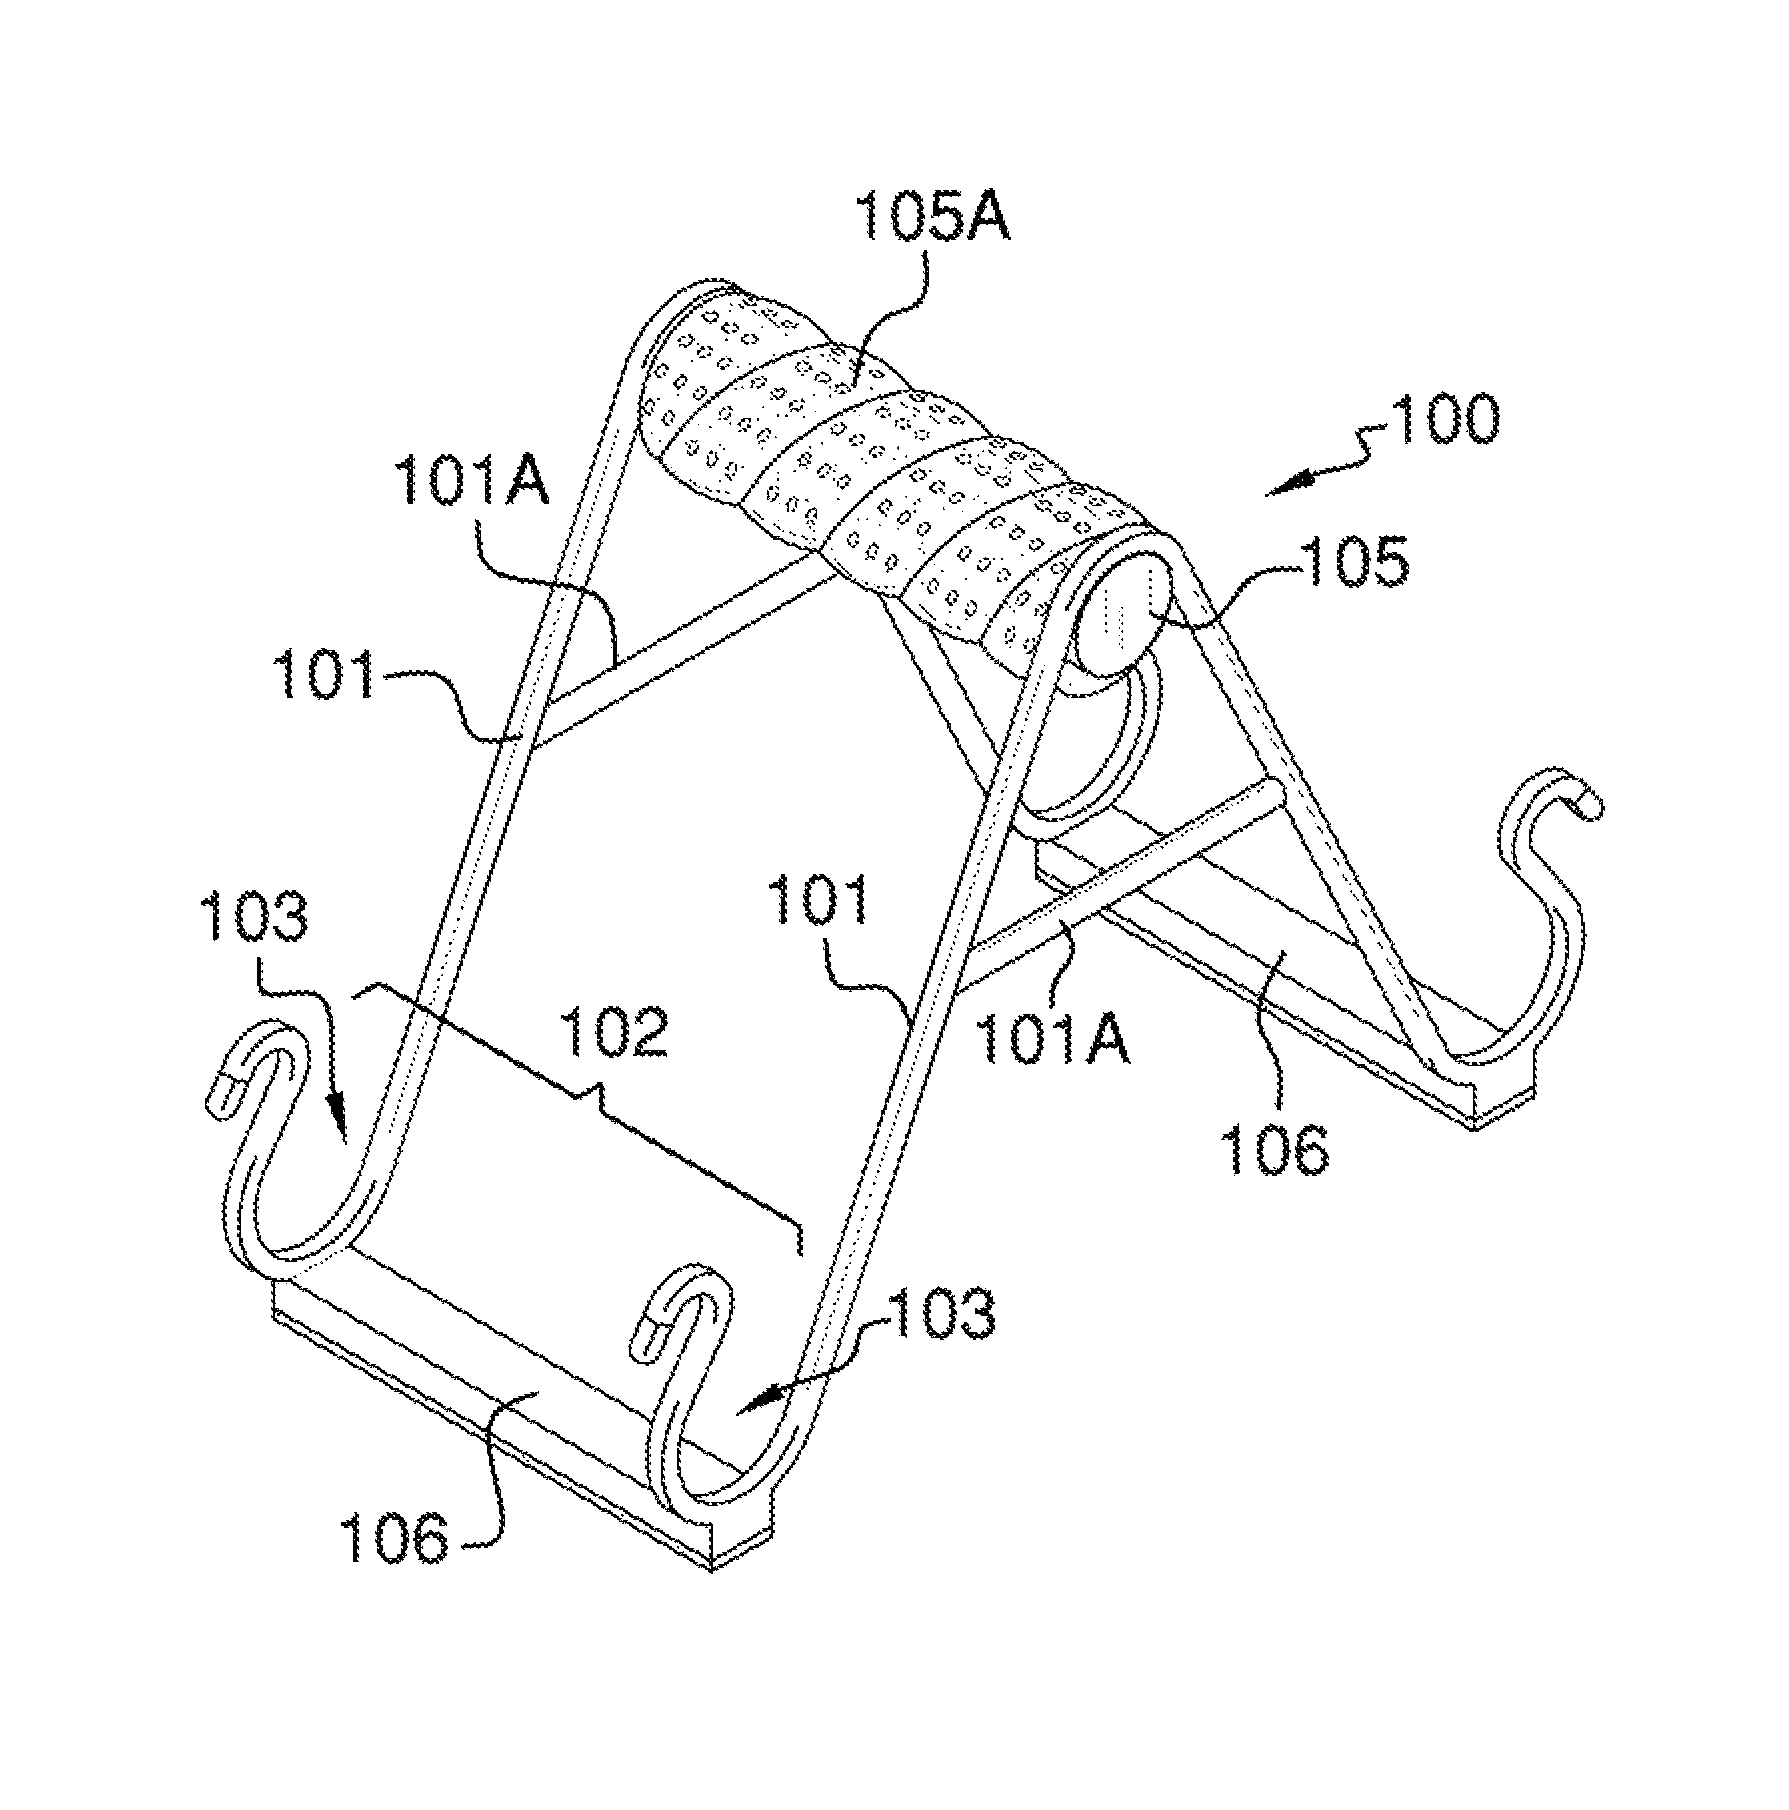 Push-up stand and dumbbell-supporting bracket